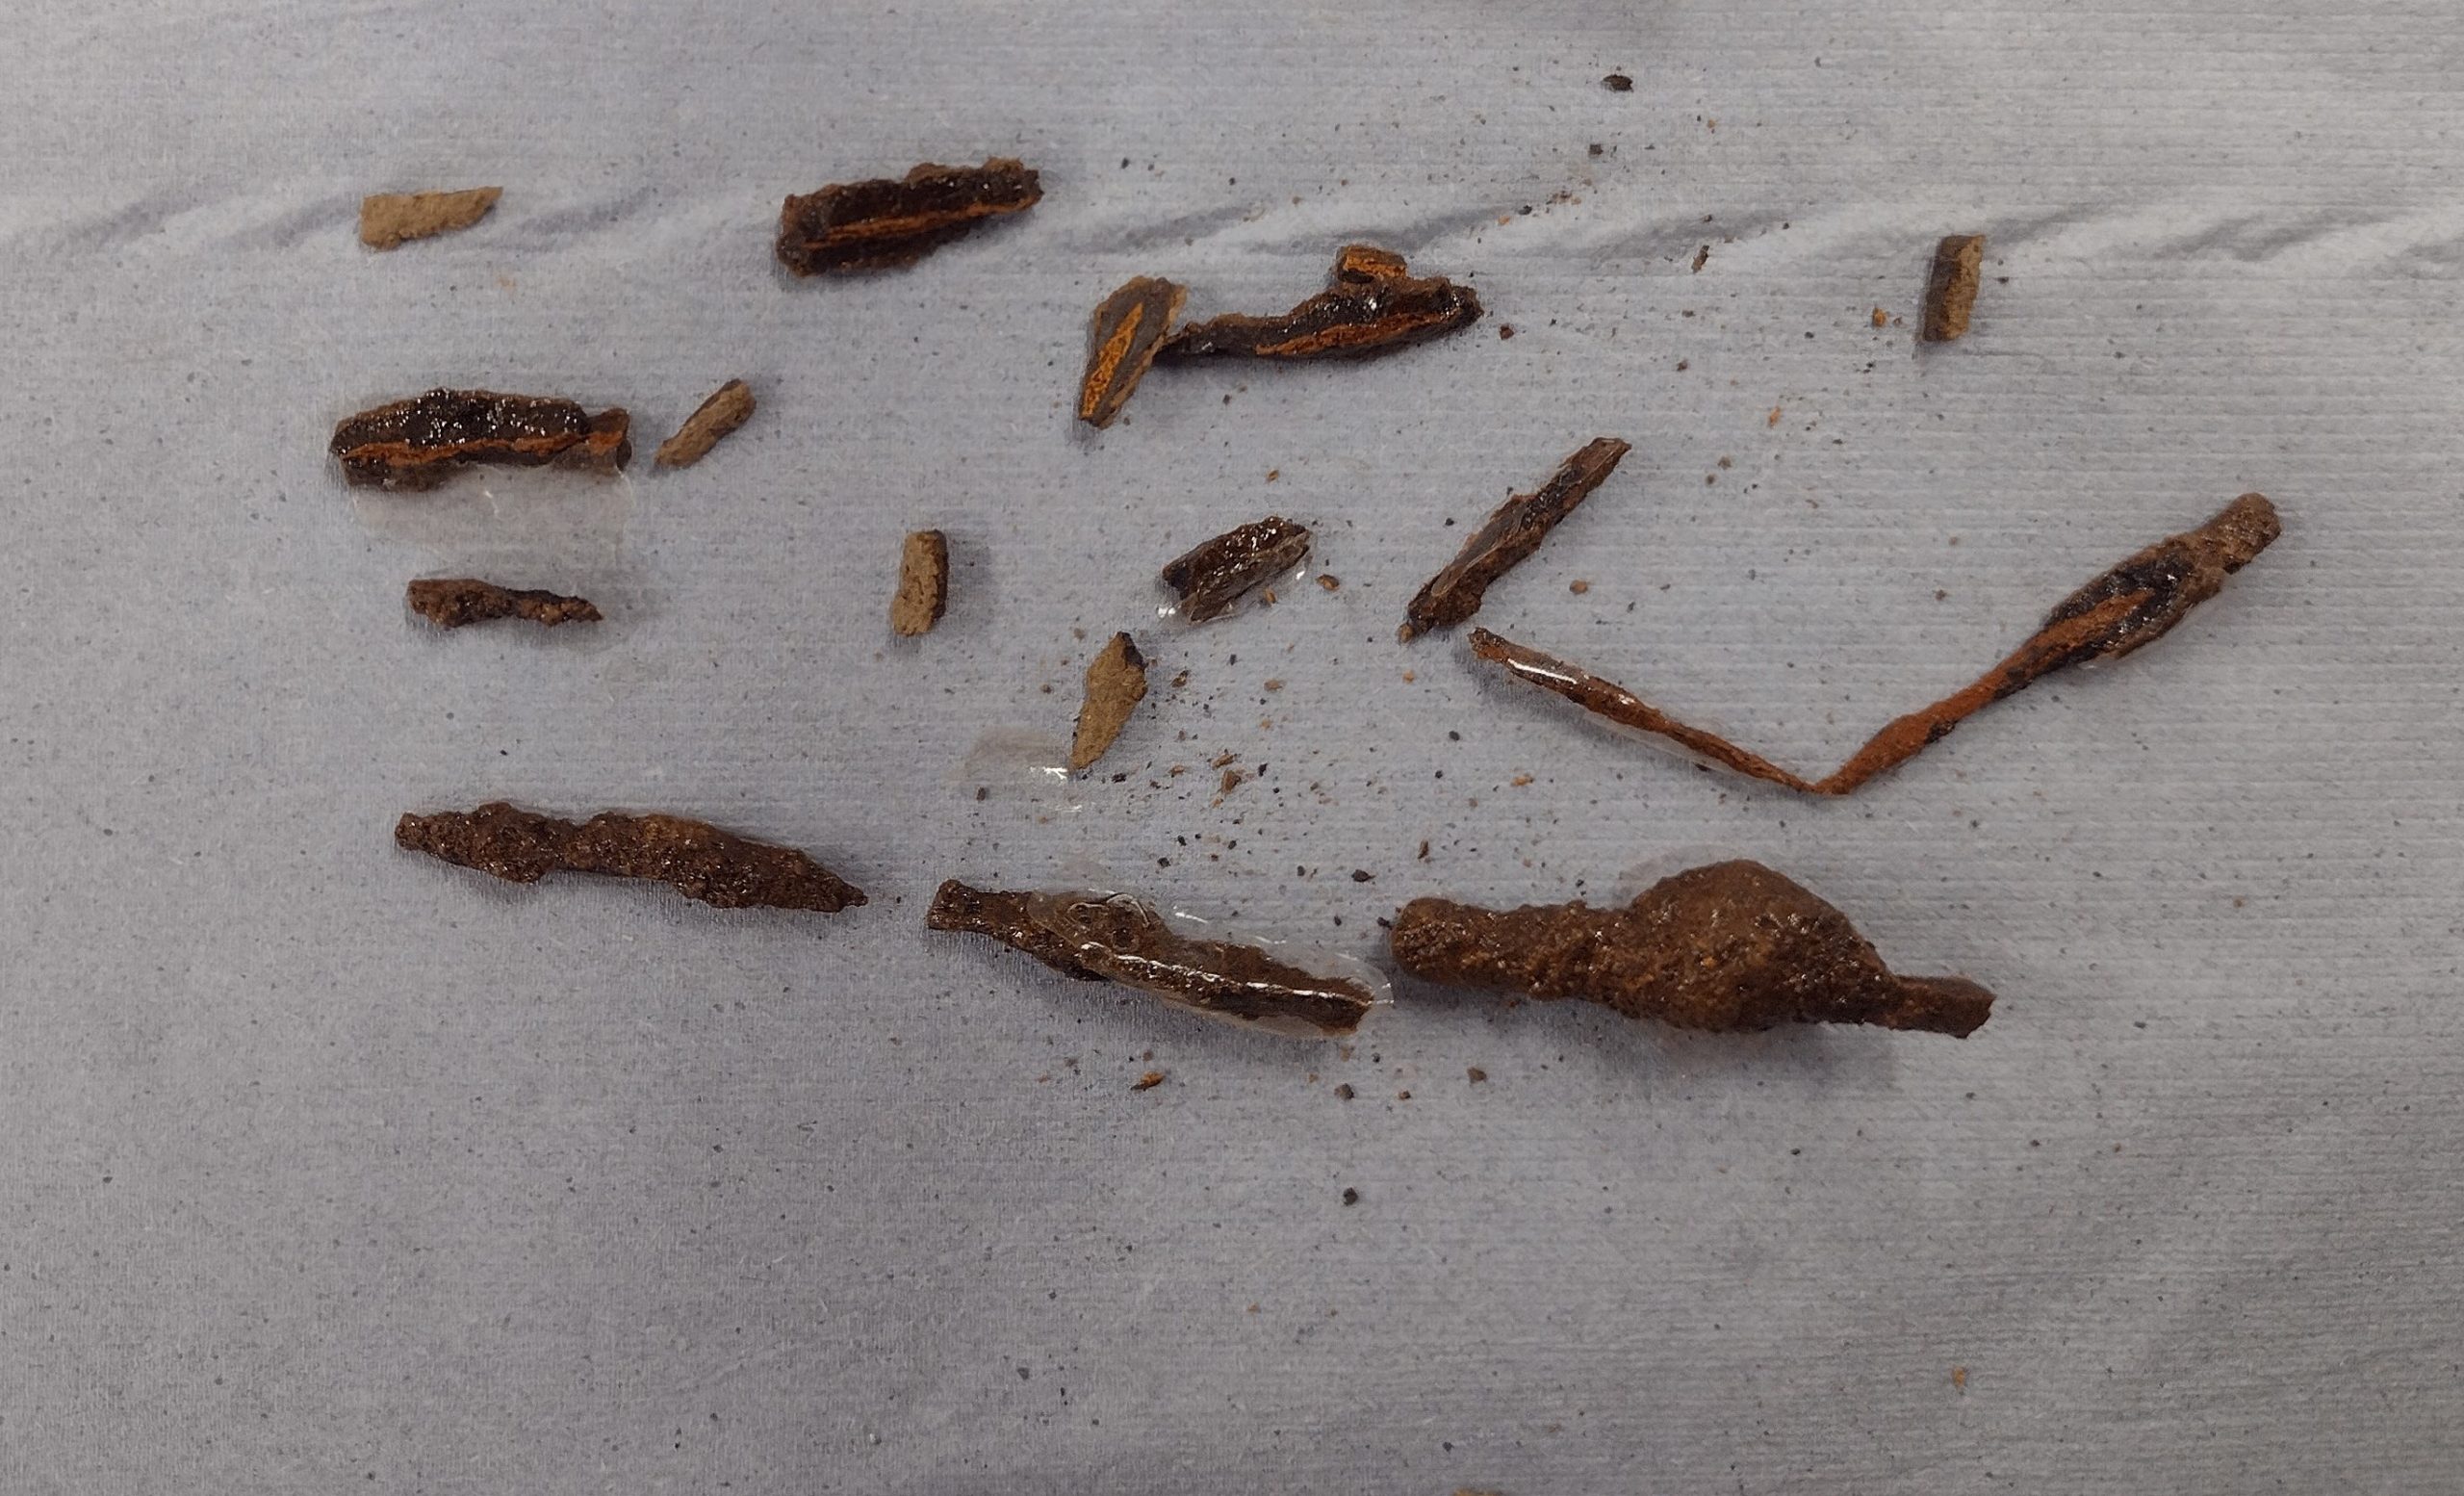 Many small fragments of an iron object covered in lumps of brown corrosion spread out on a piece of blue roll. Three larger long fragments at the bottom of the image show the surviving main body of the object.